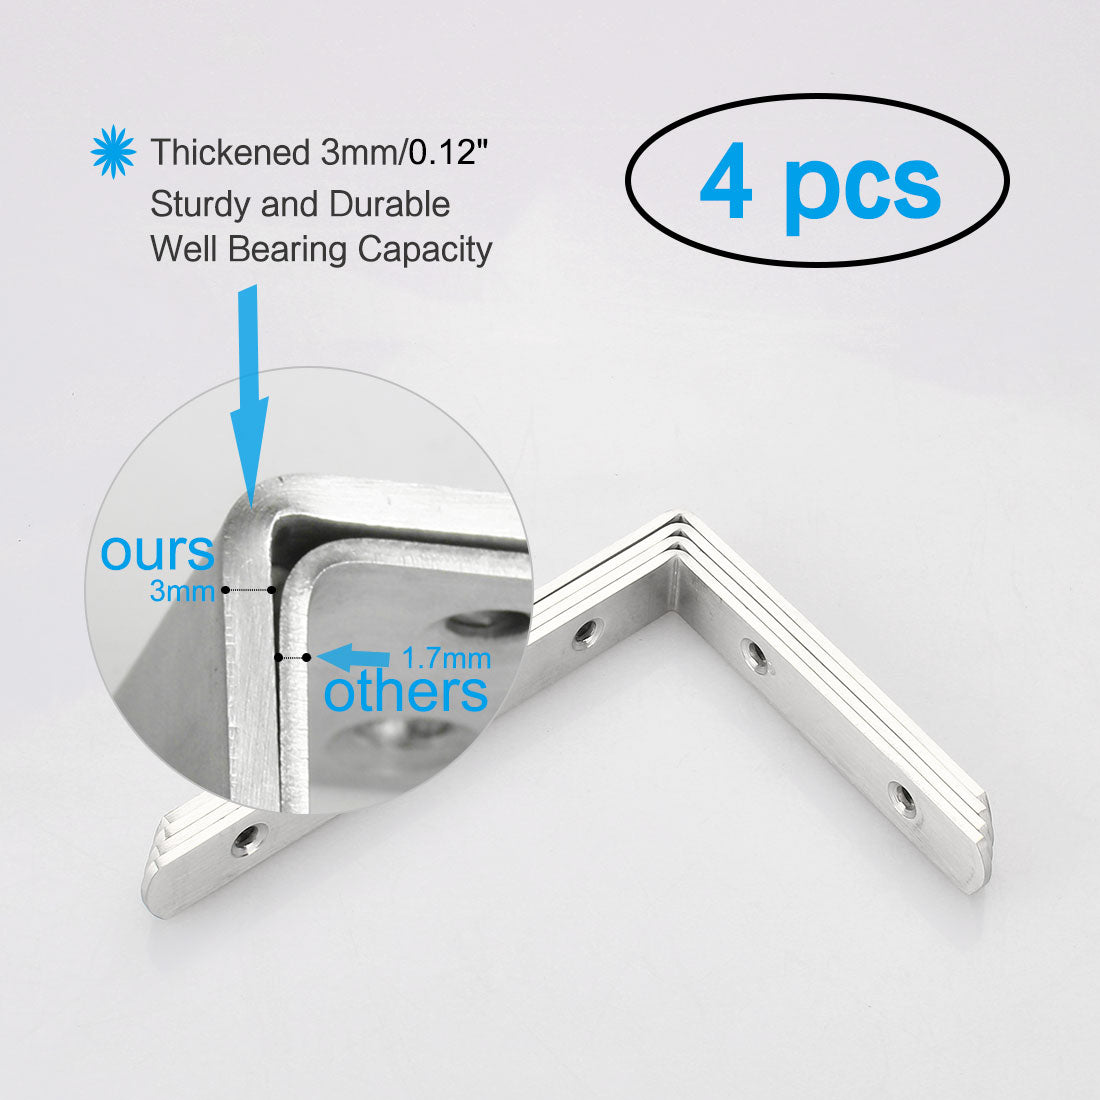 uxcell Uxcell Angle Bracket Stainless Steel Brace Fastener Support w Screws 150 x 110mm, 4pcs